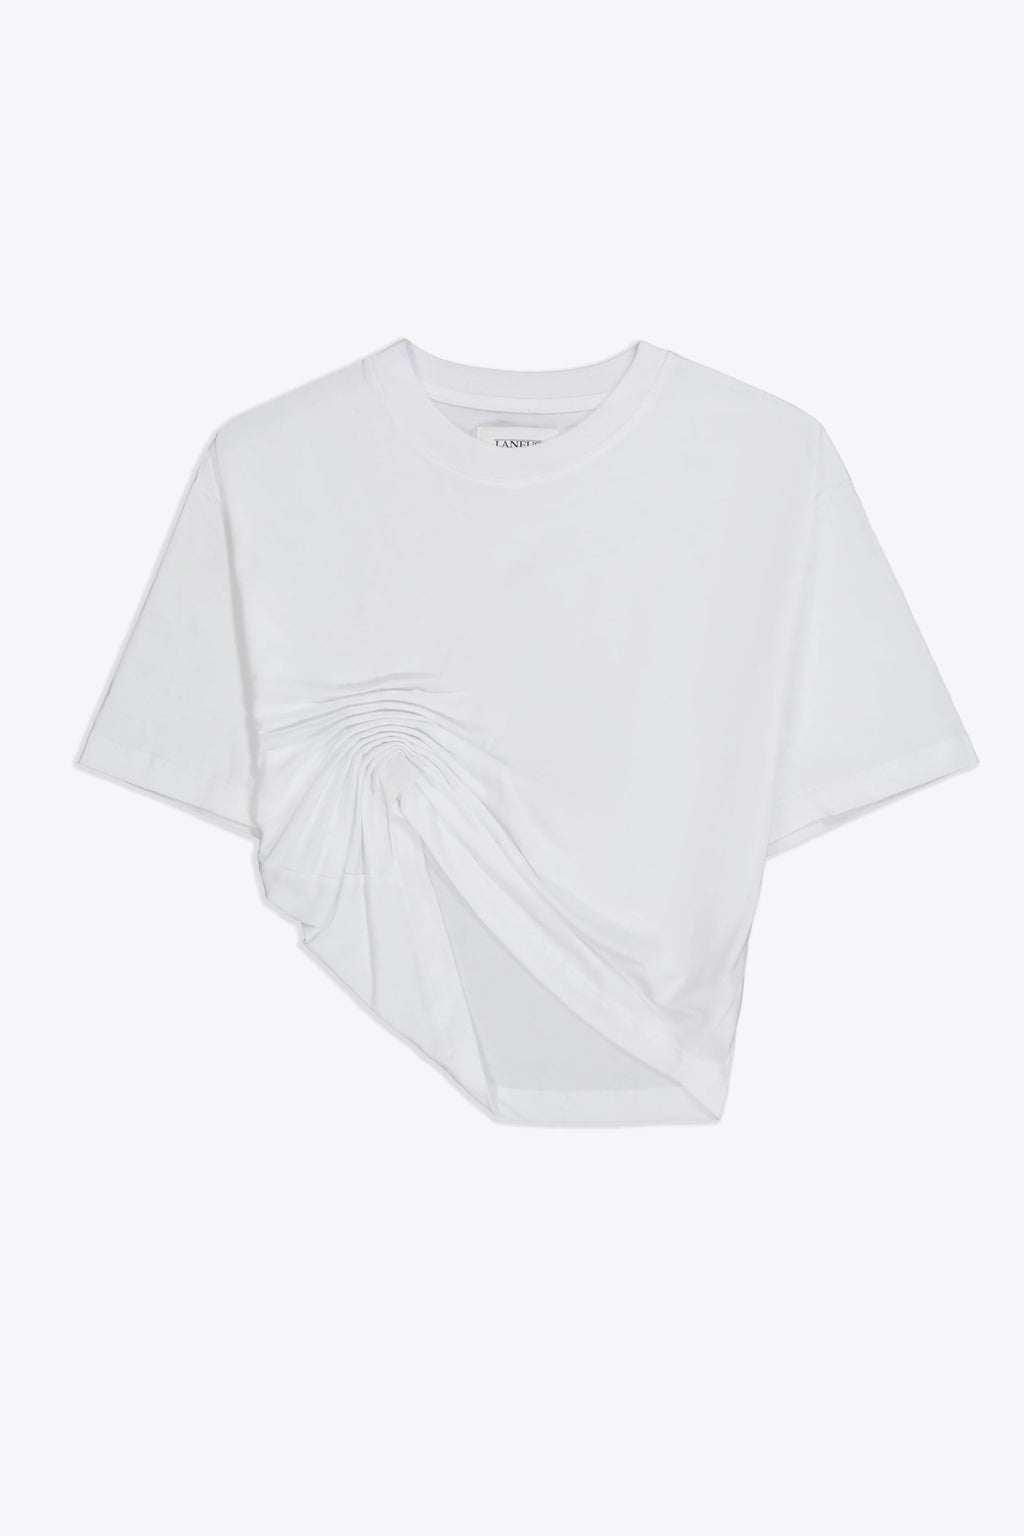 alt-image__White-cotton-cropped-t-shirt-with-drapery---Jersey-T-shirt